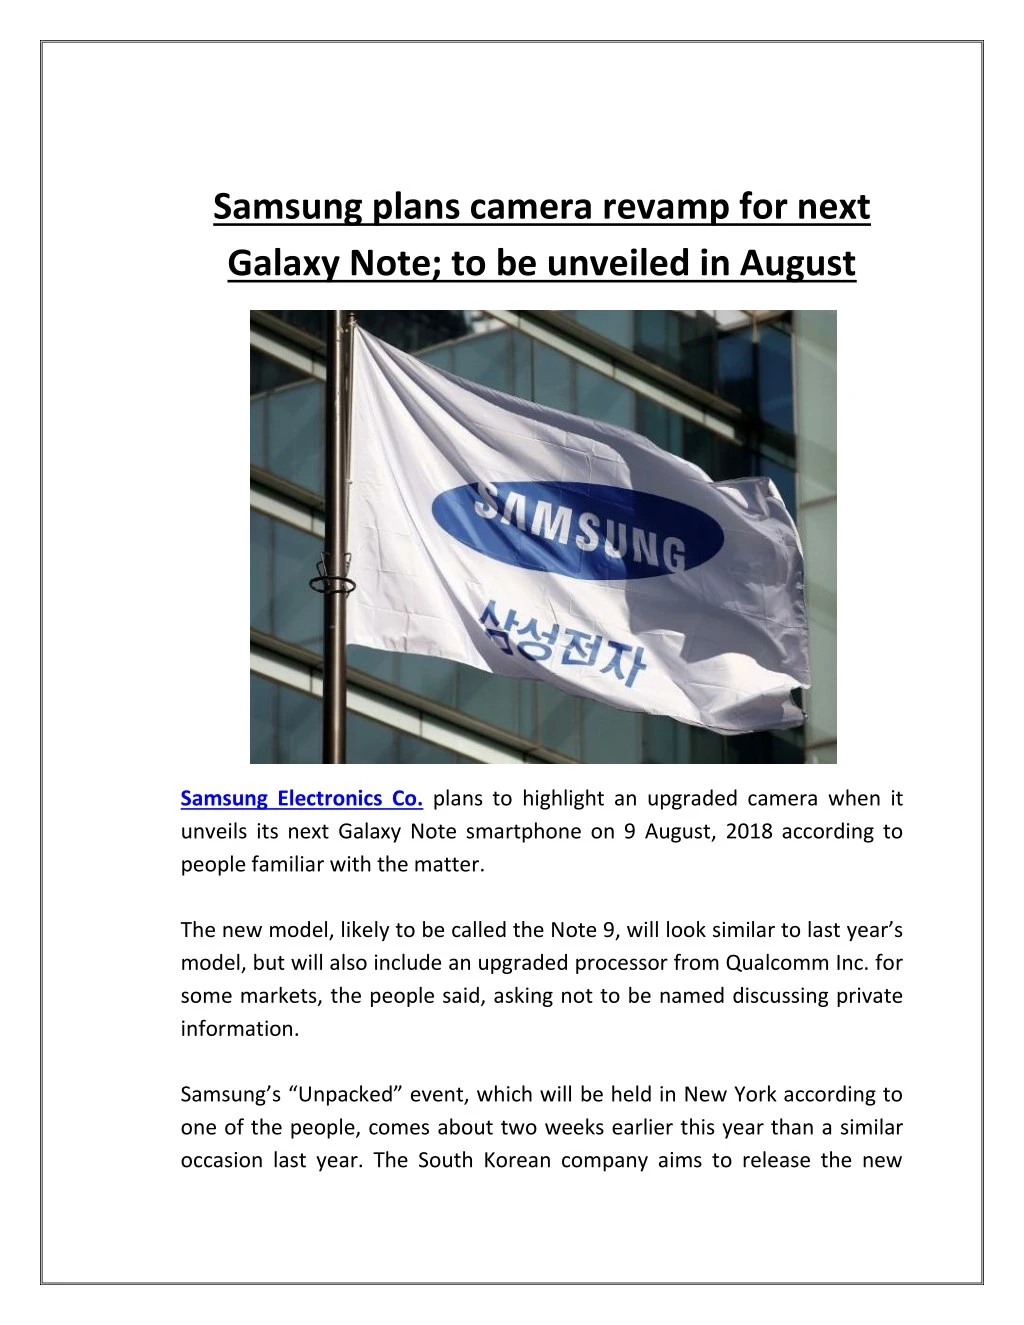 samsung plans camera revamp for next galaxy note